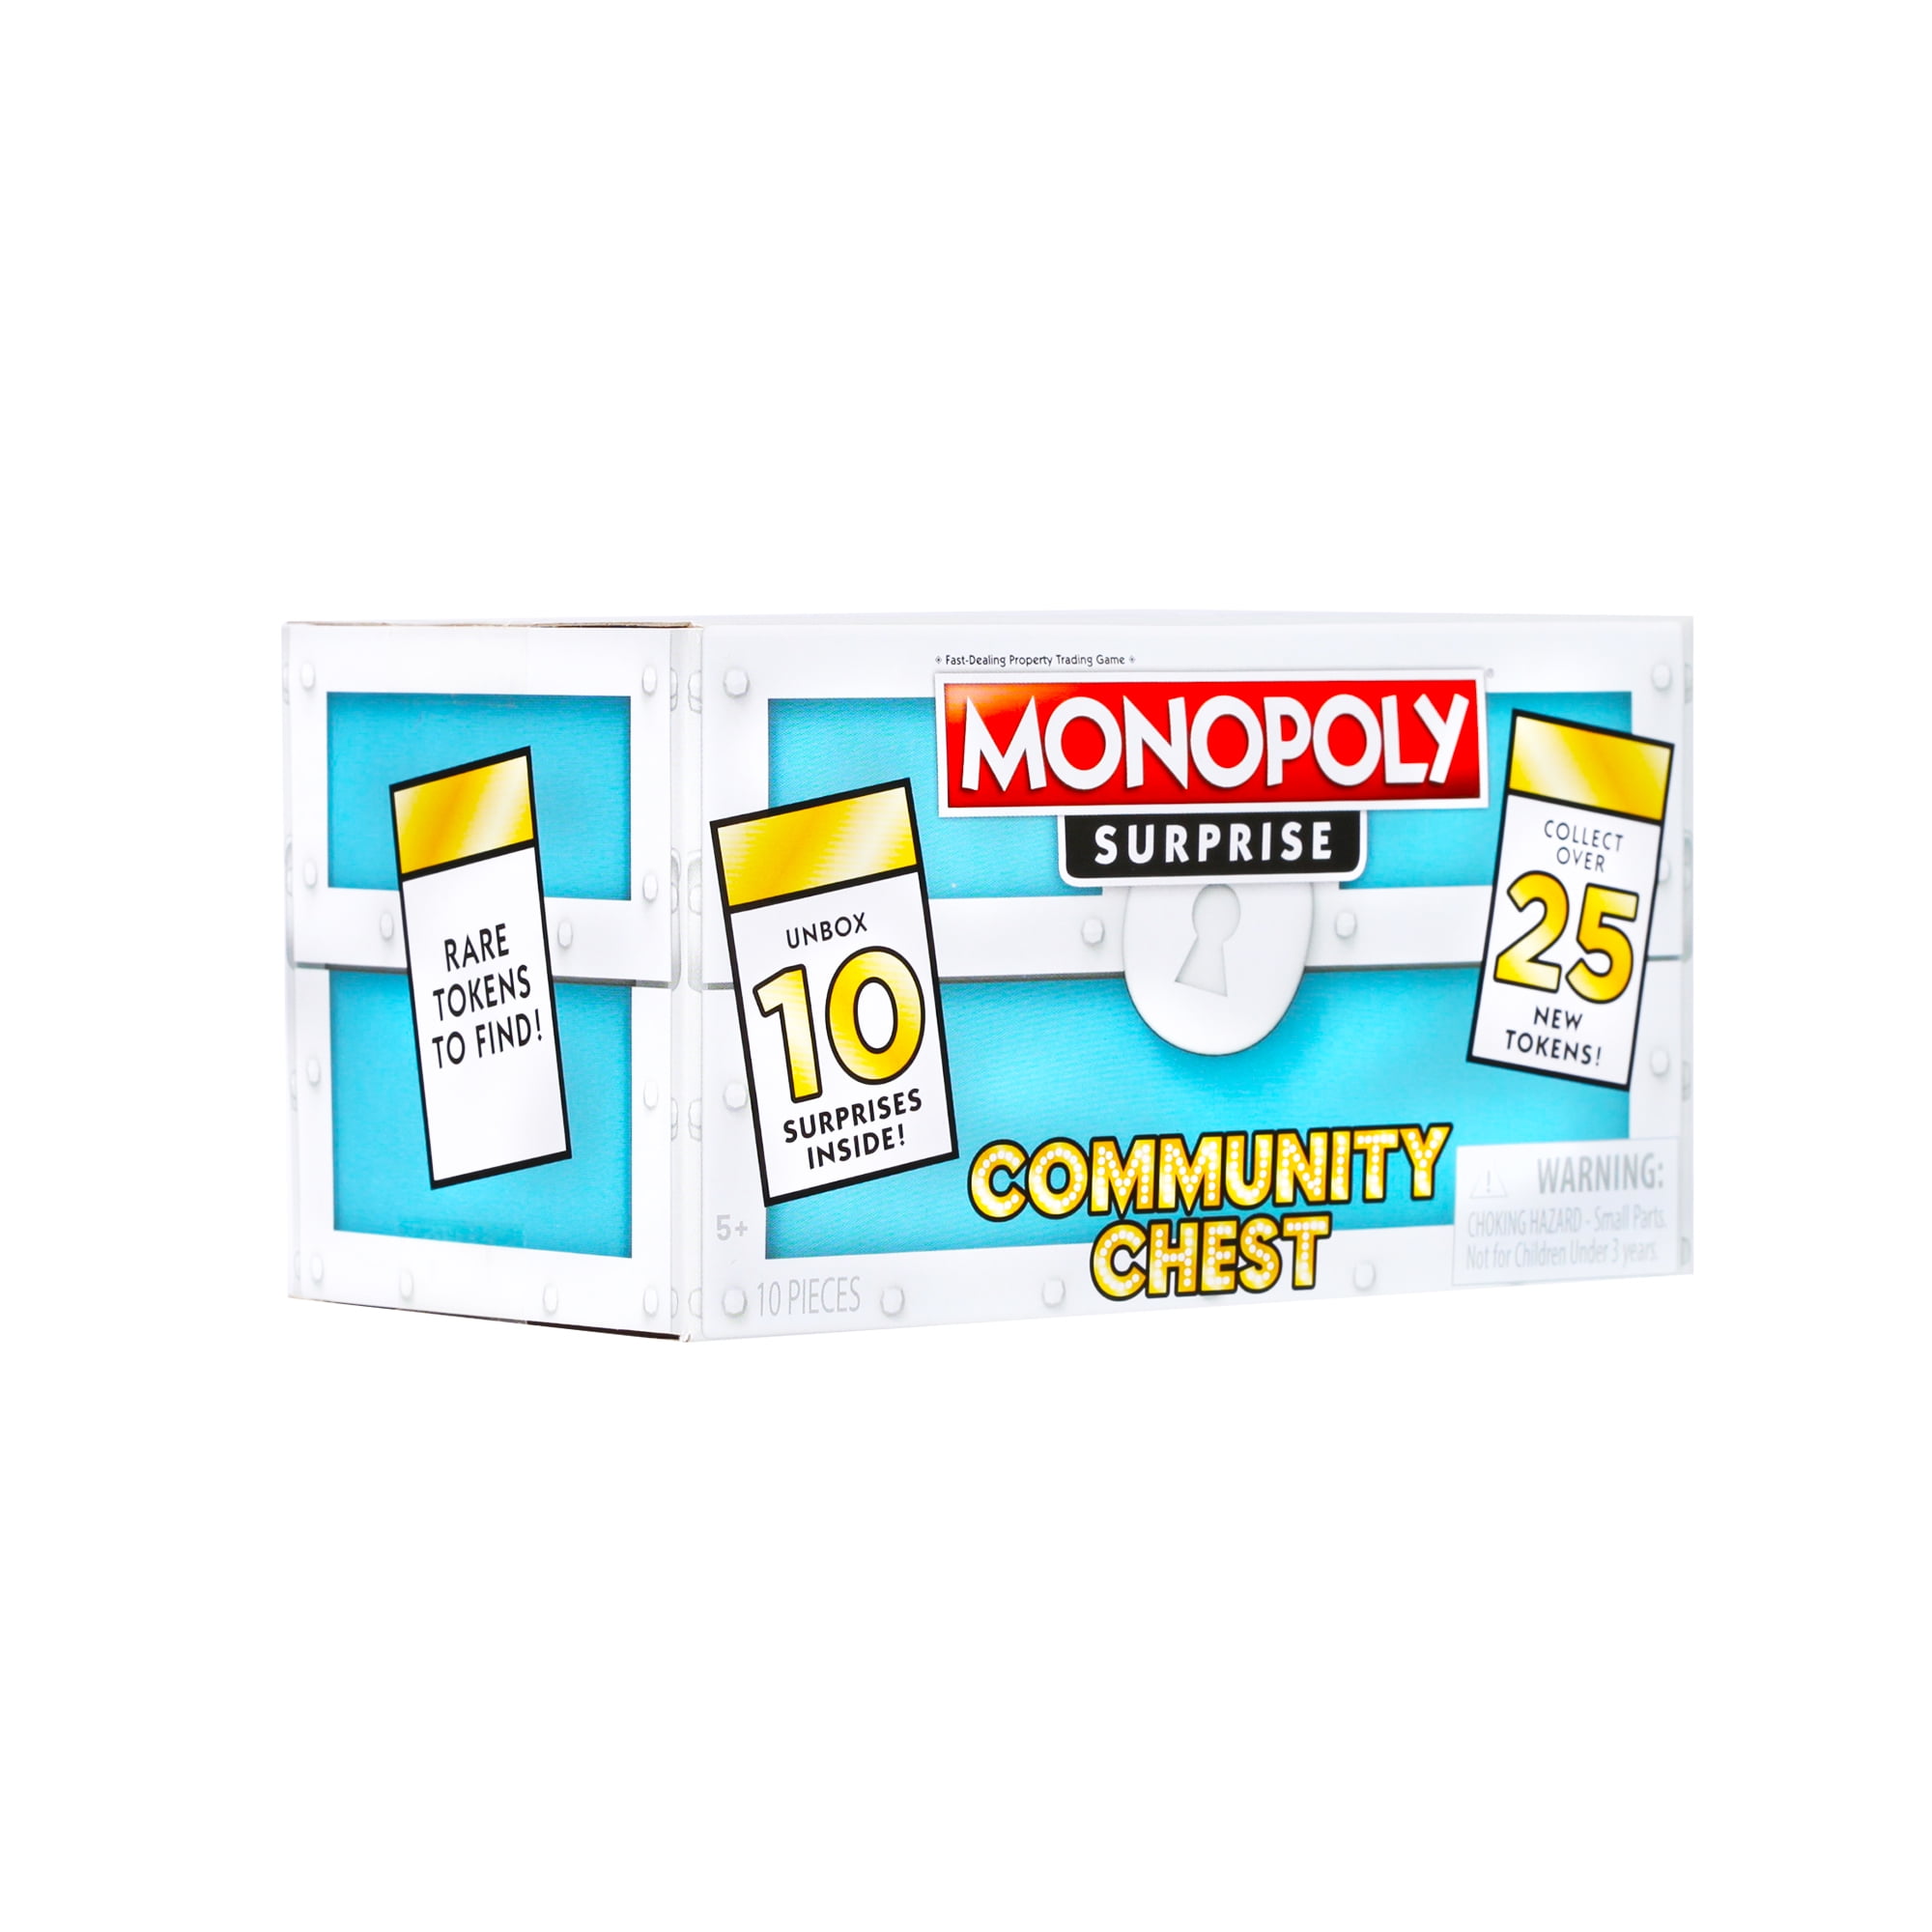 Monopoly Surprise Exclusive Collectible Tokens LOT of 16 Boxes New BOX 